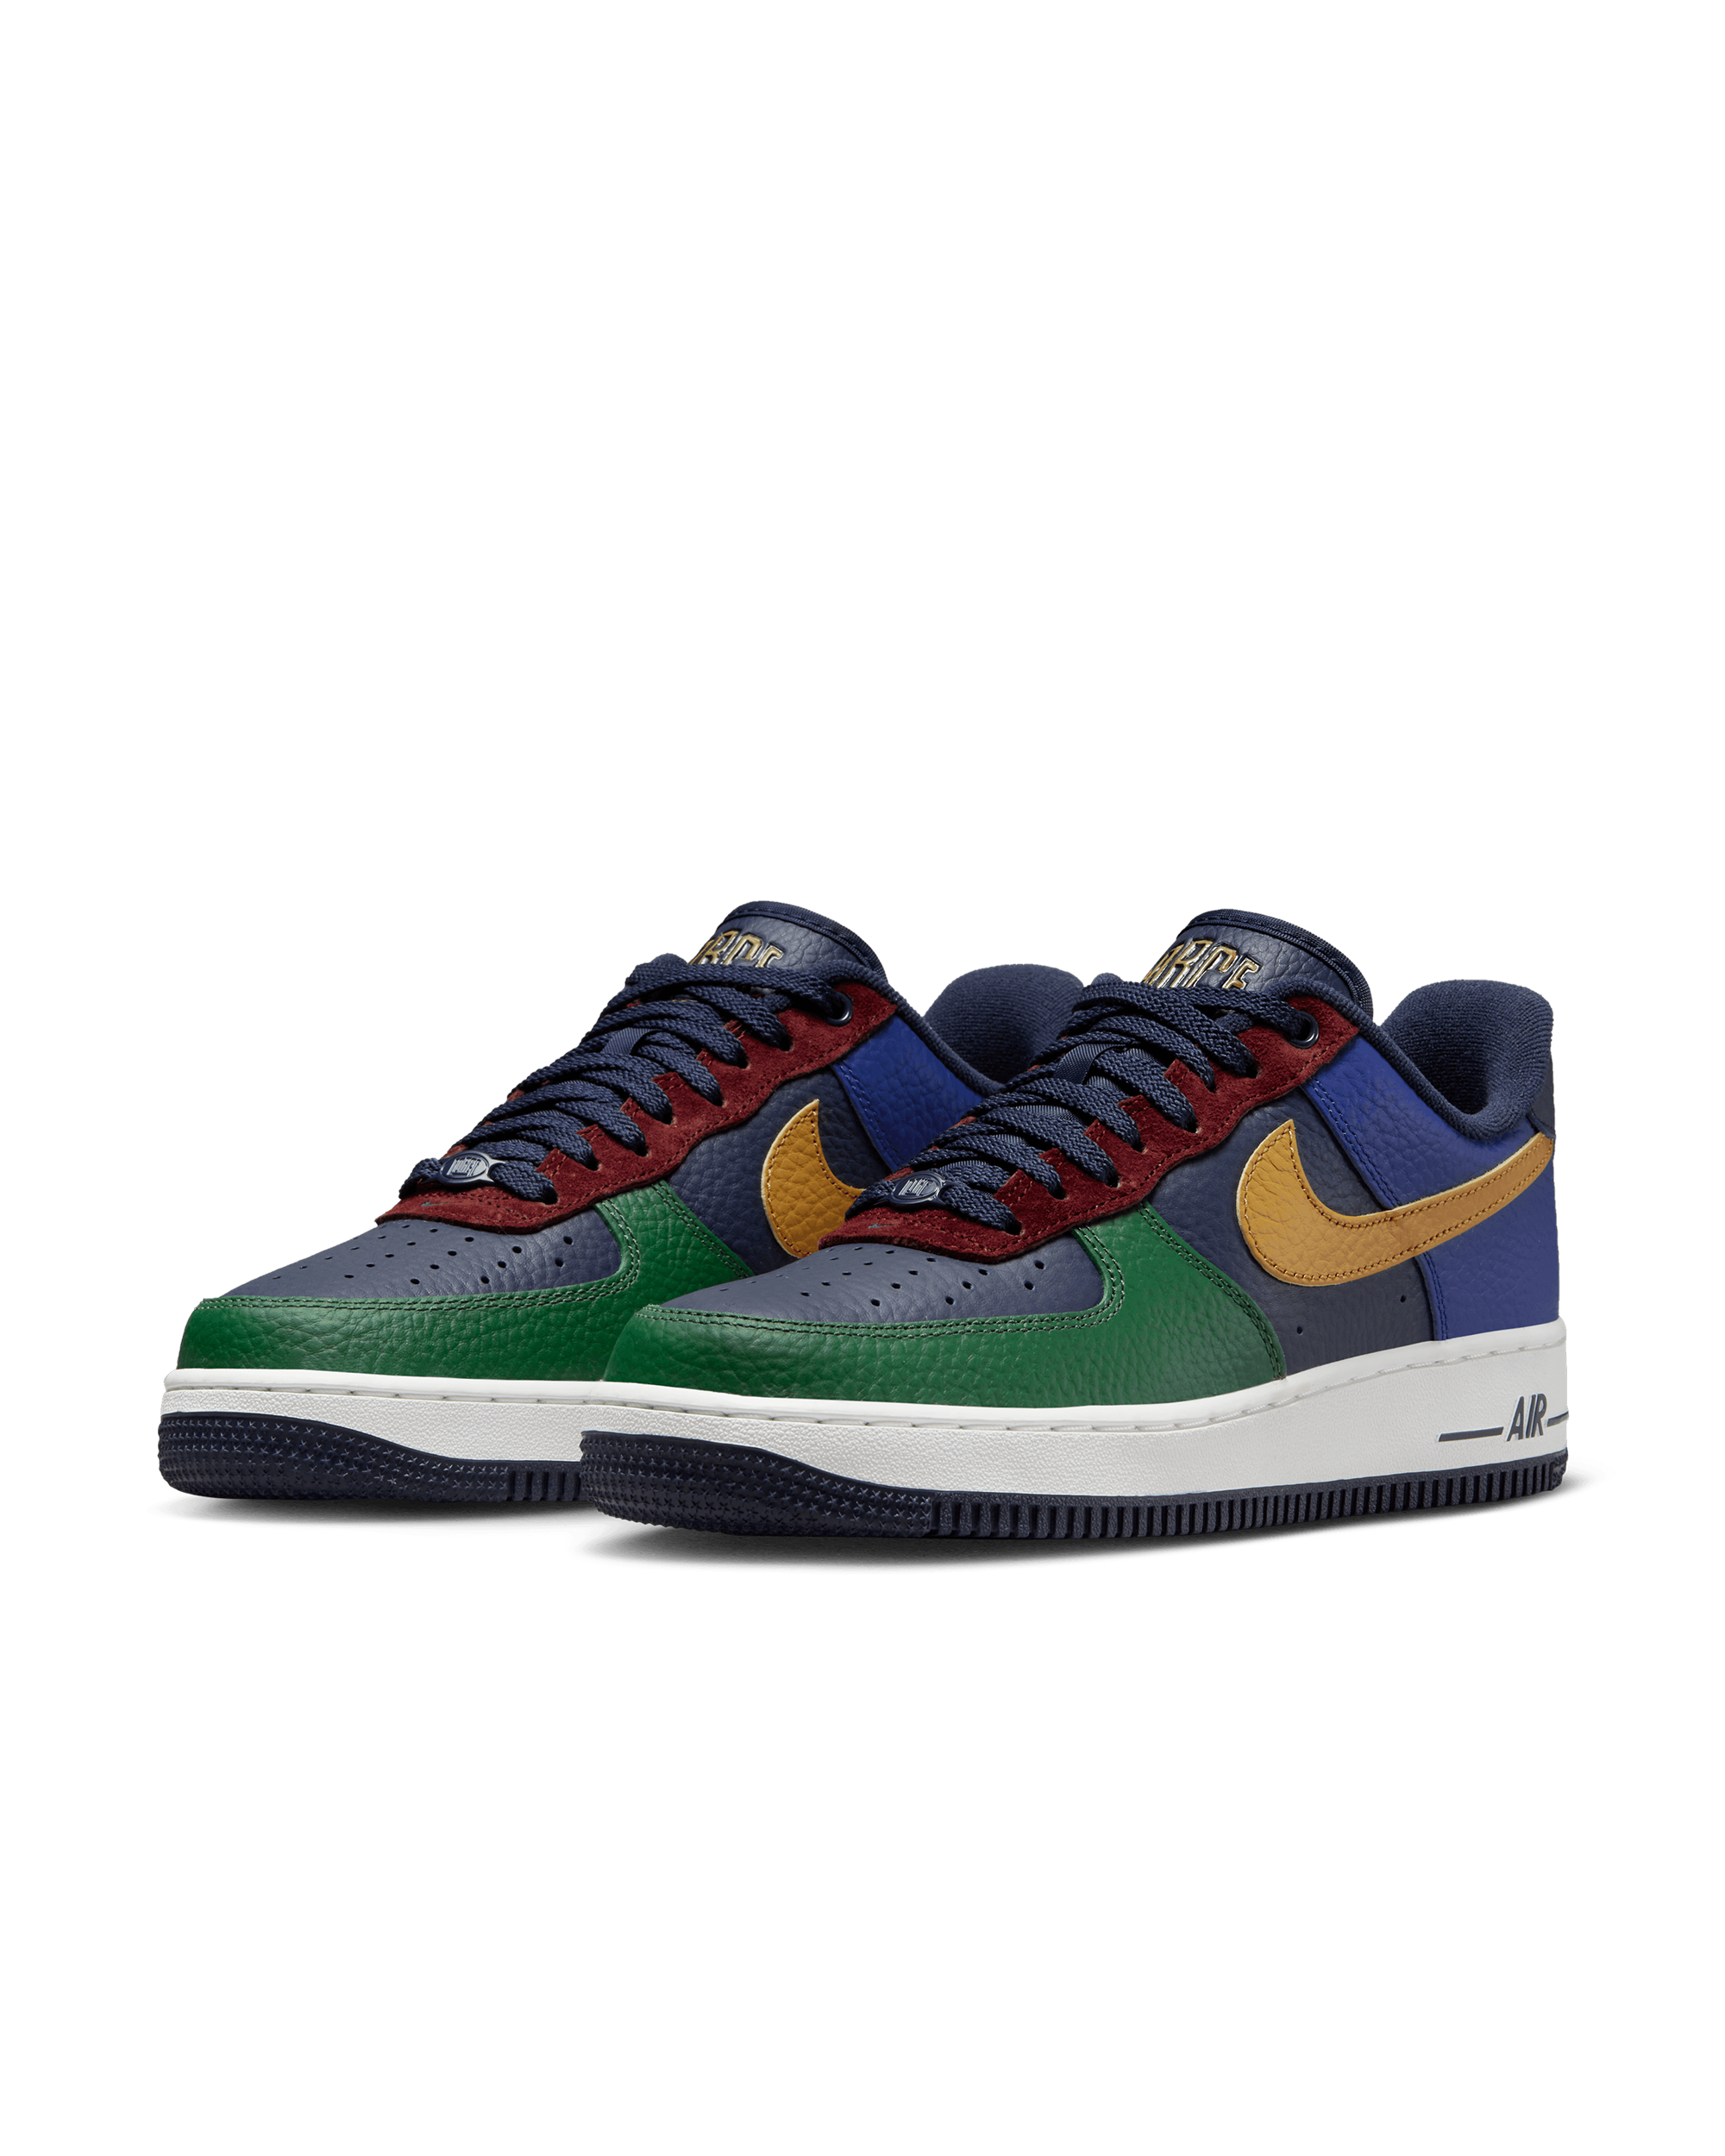 Womens Air Force 1 '07 LX - Gorge Green / Gold Suede / Obsidian